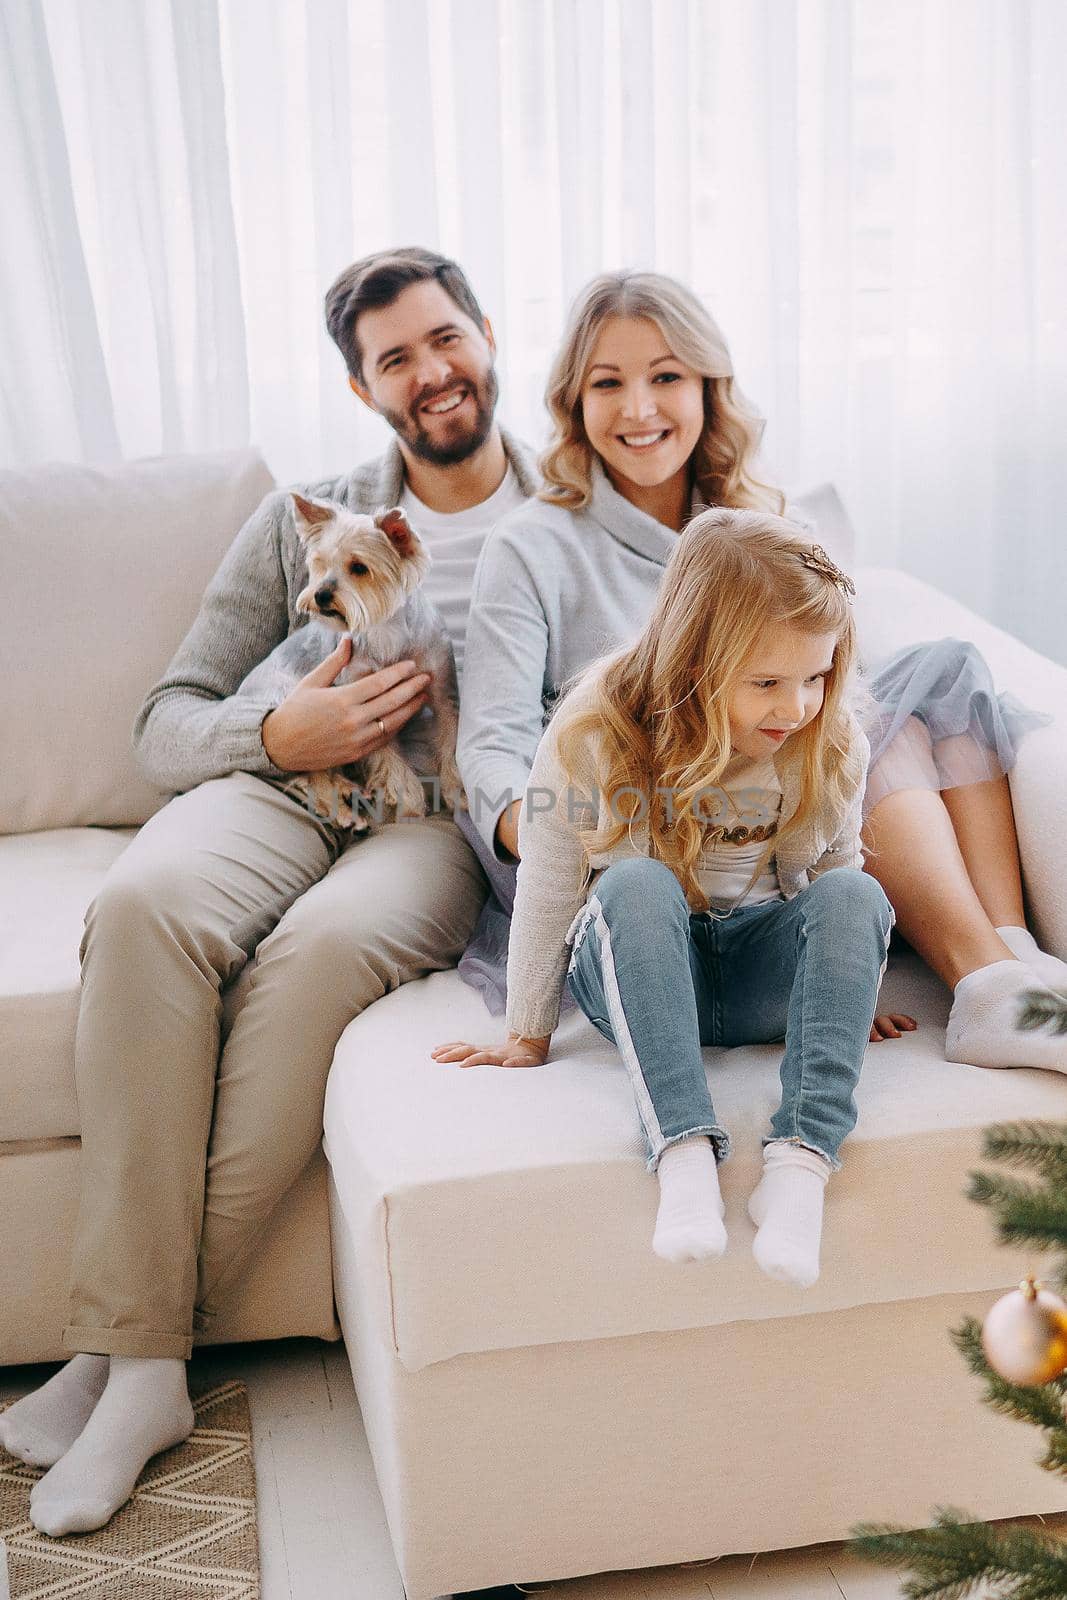 Happy family: mom, dad and pet. Family in a bright New Year's interior with a Christmas tree. by Annu1tochka